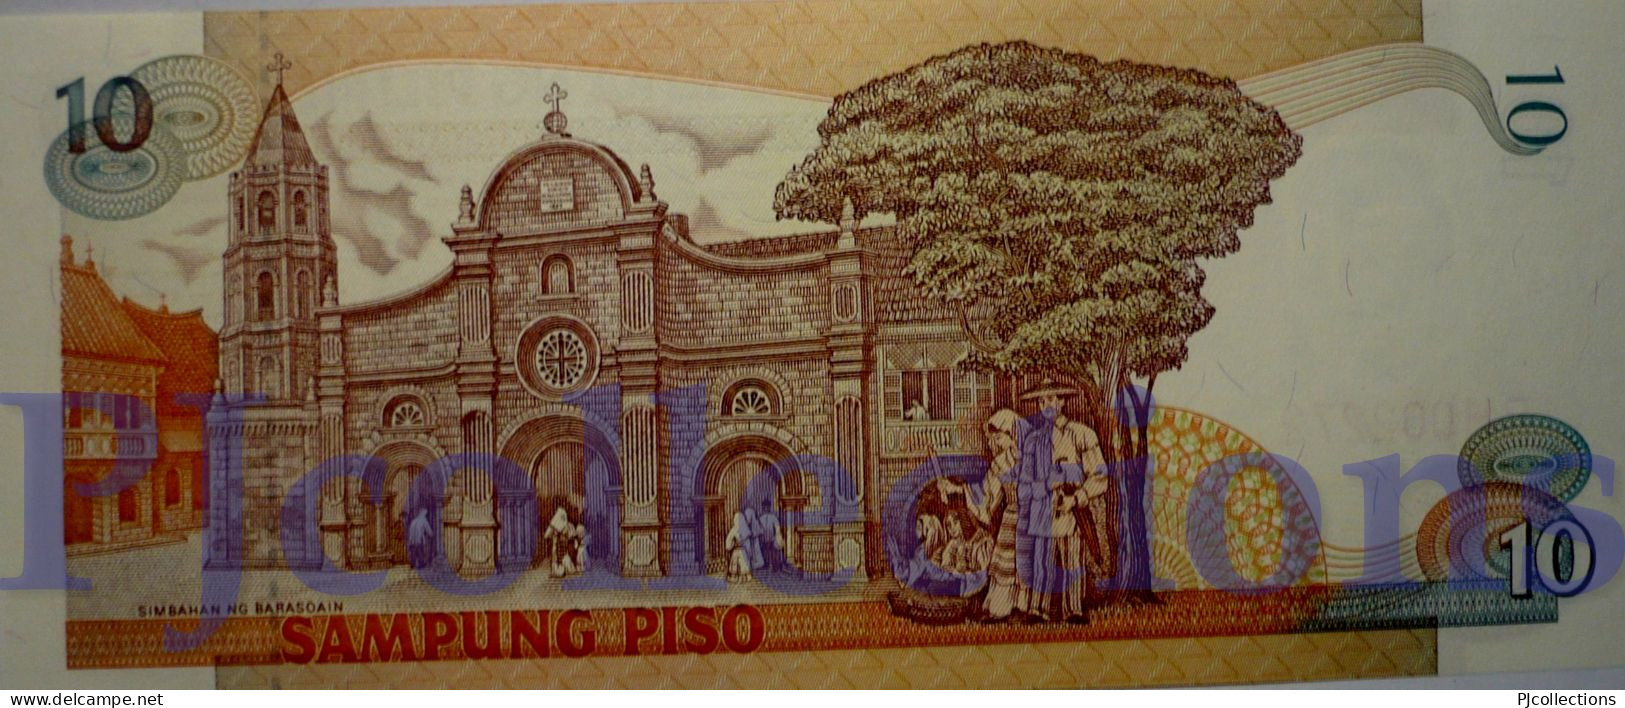 PHILIPPINES 10 PISO 1995/97 PICK 181a UNC LOW SERIAL NUMBER "RH002272 - Philippinen